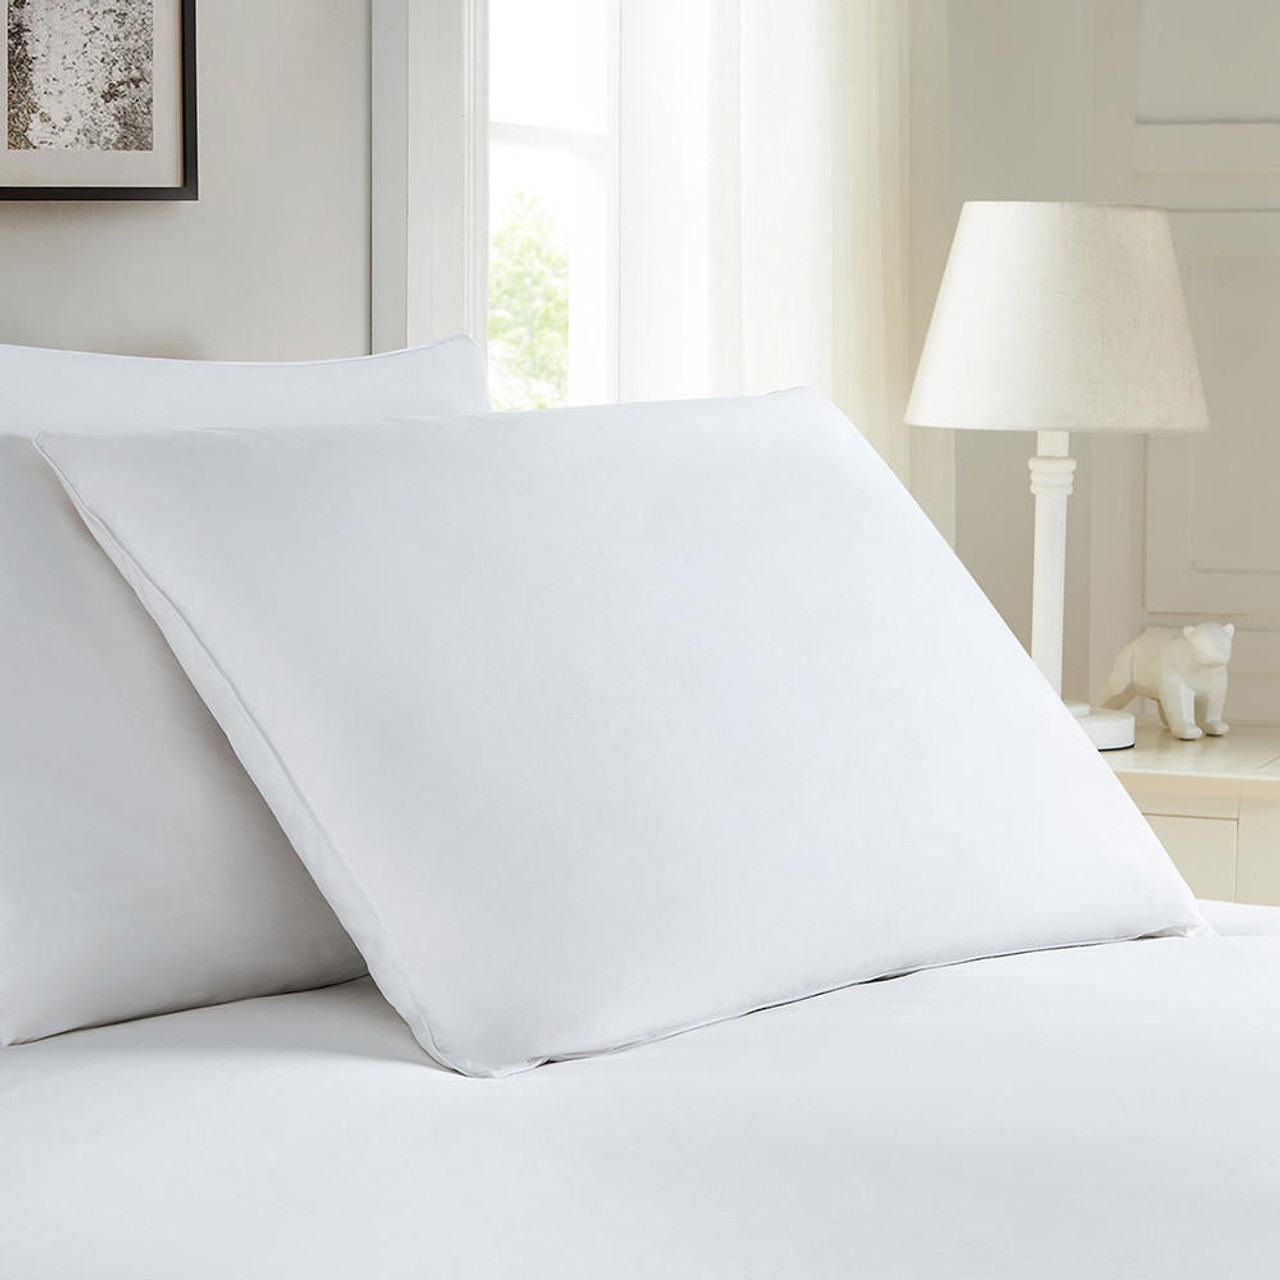 Bed Pillows Come In Different Shapes? - DOWNLITE